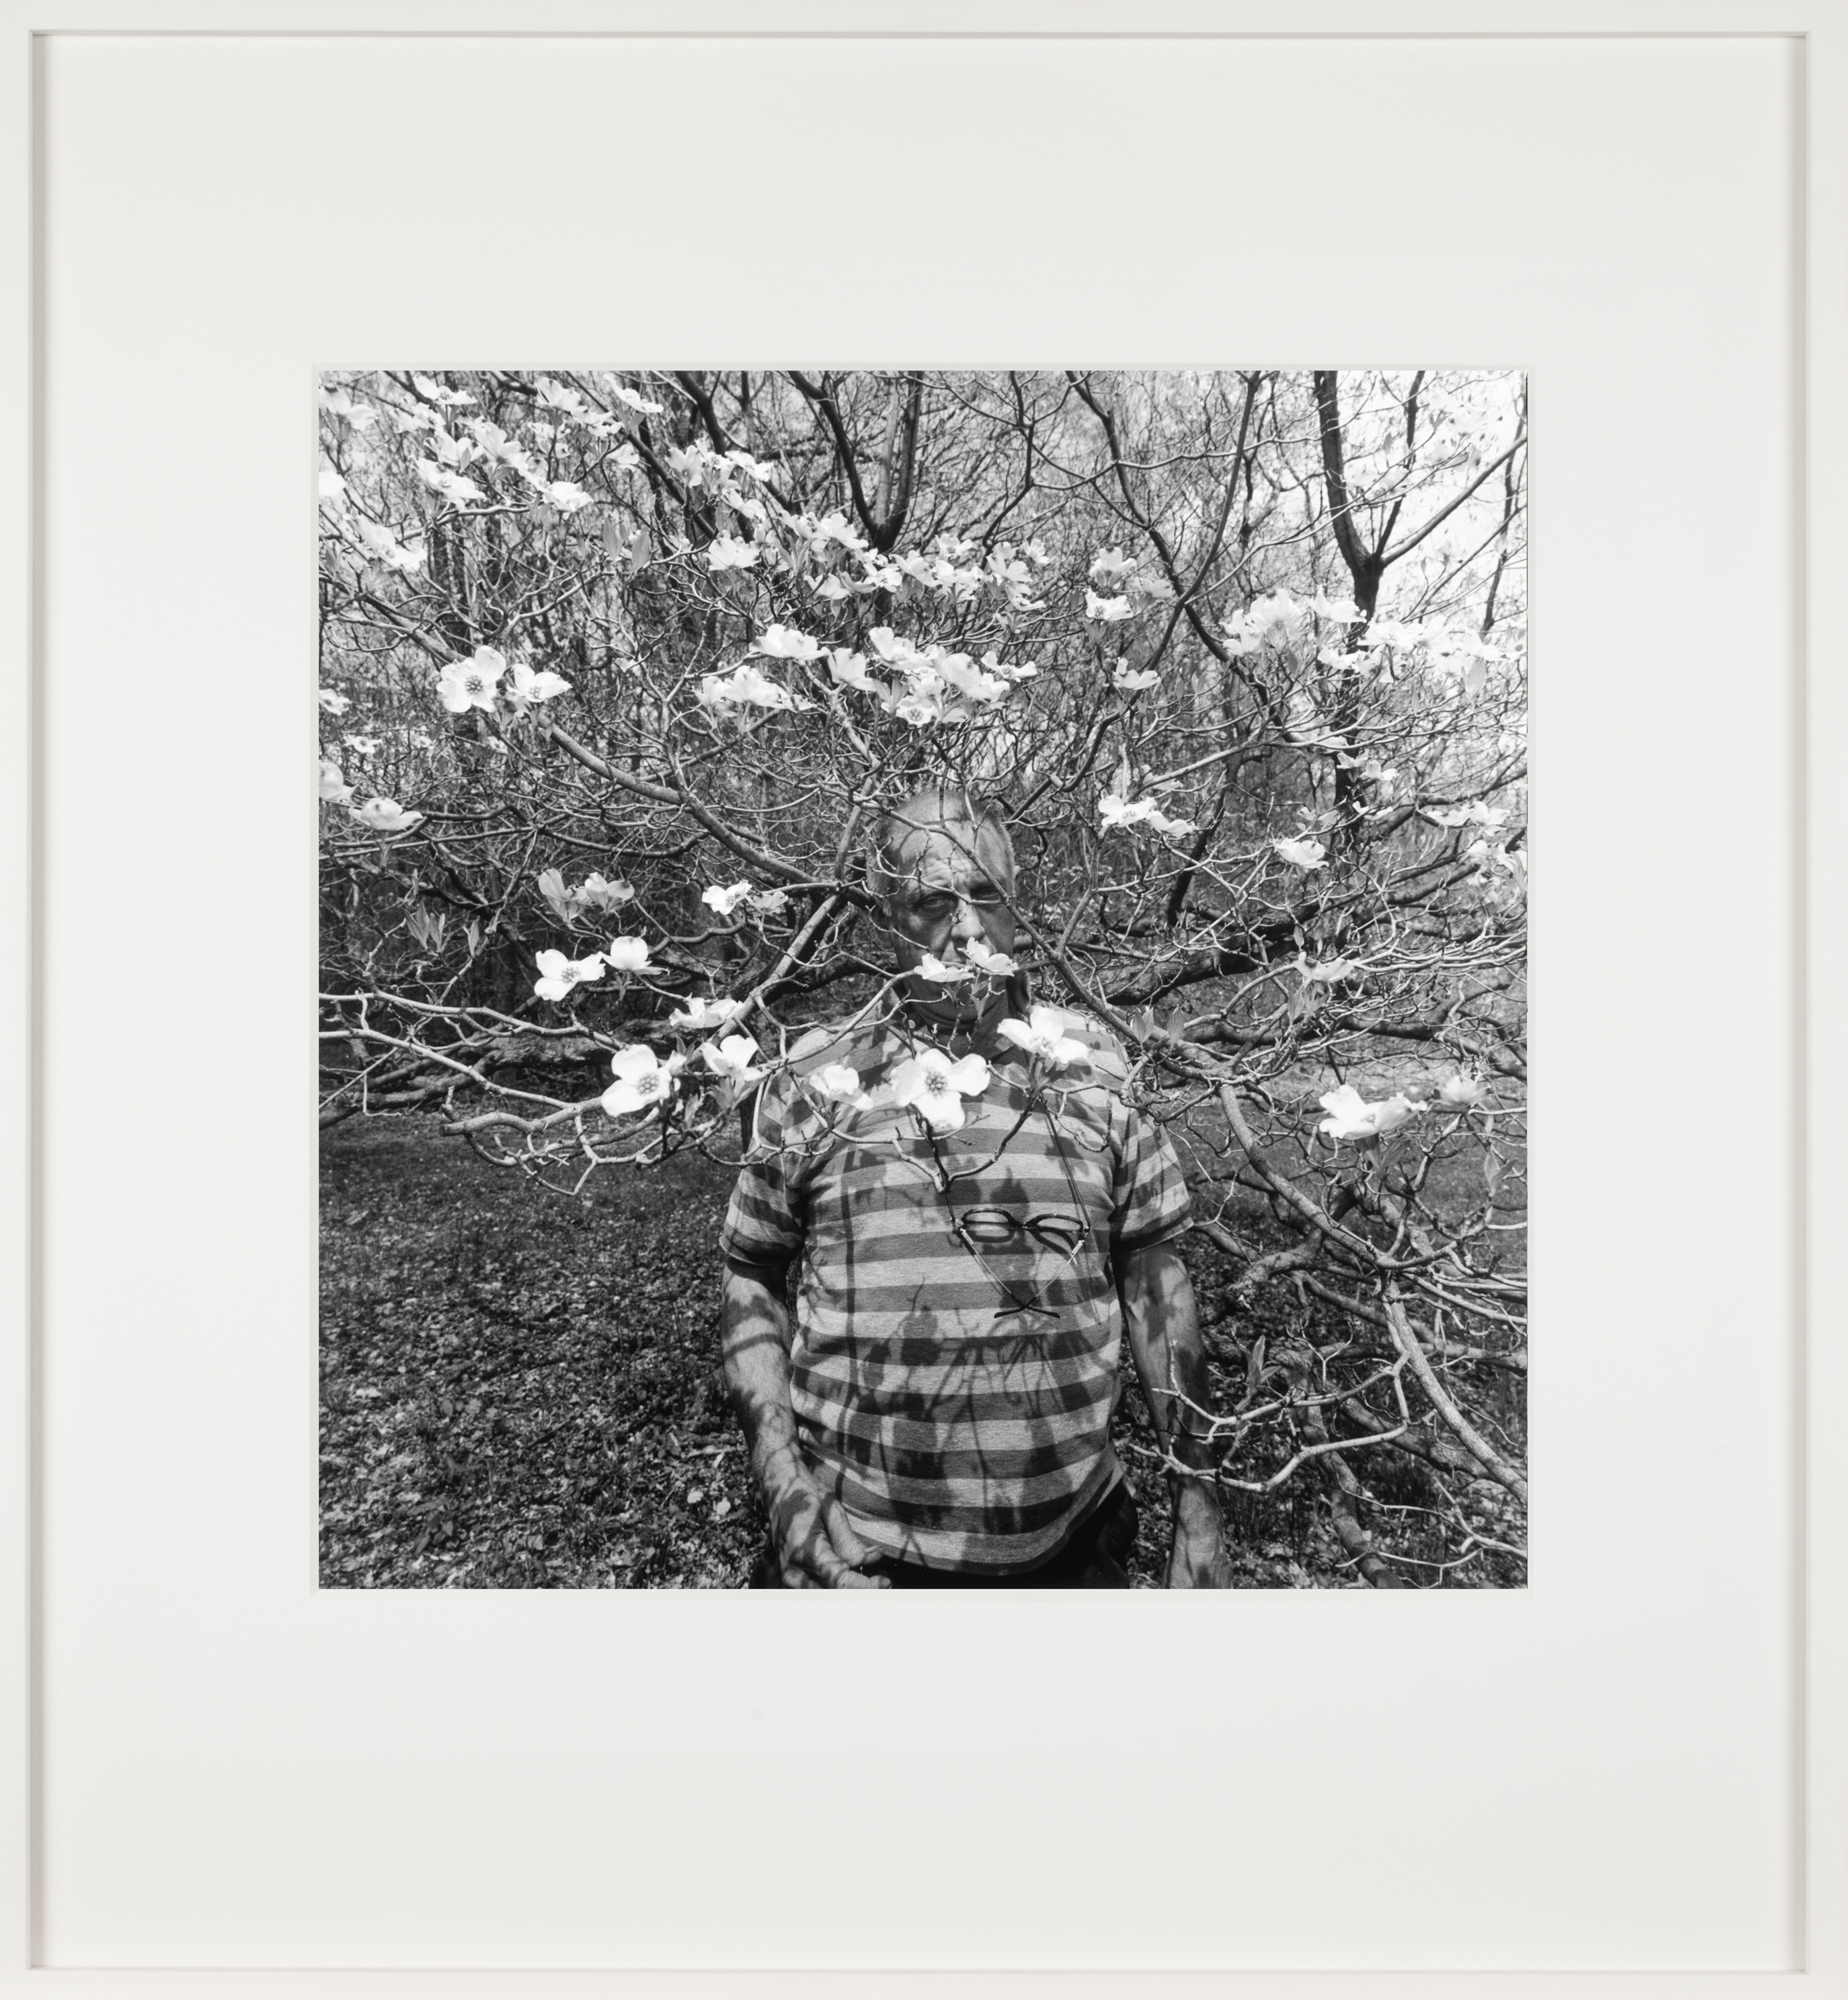 Black and white photograph of a figure standing within a blossomed tree framed in white